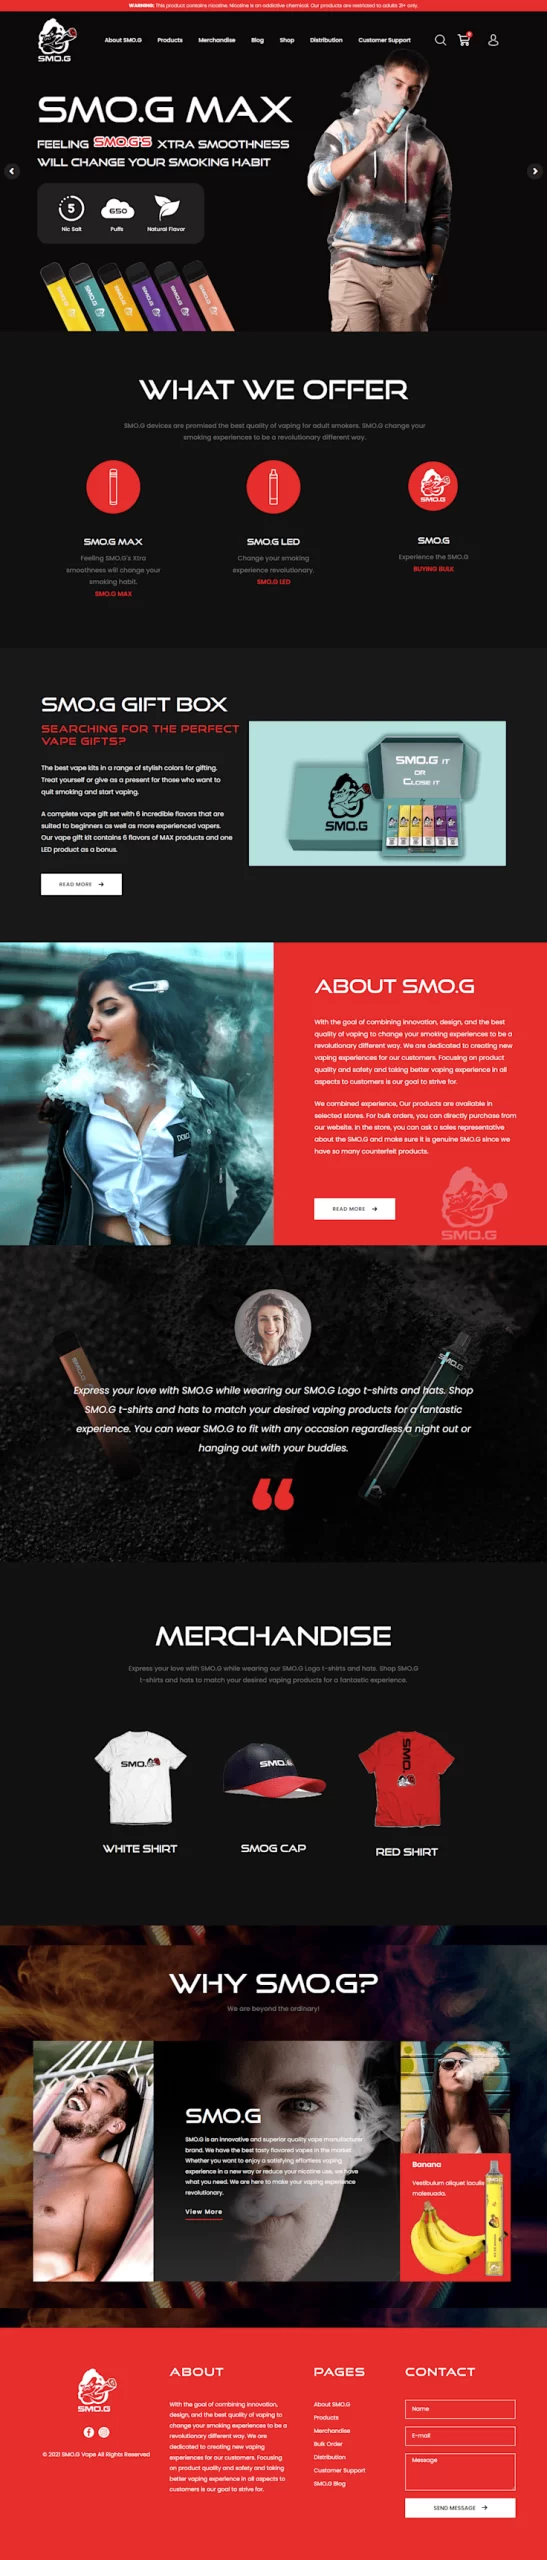 TAIBACreations Our team has converted this beautiful UI/UX design into a fully loaded WordPress Website.